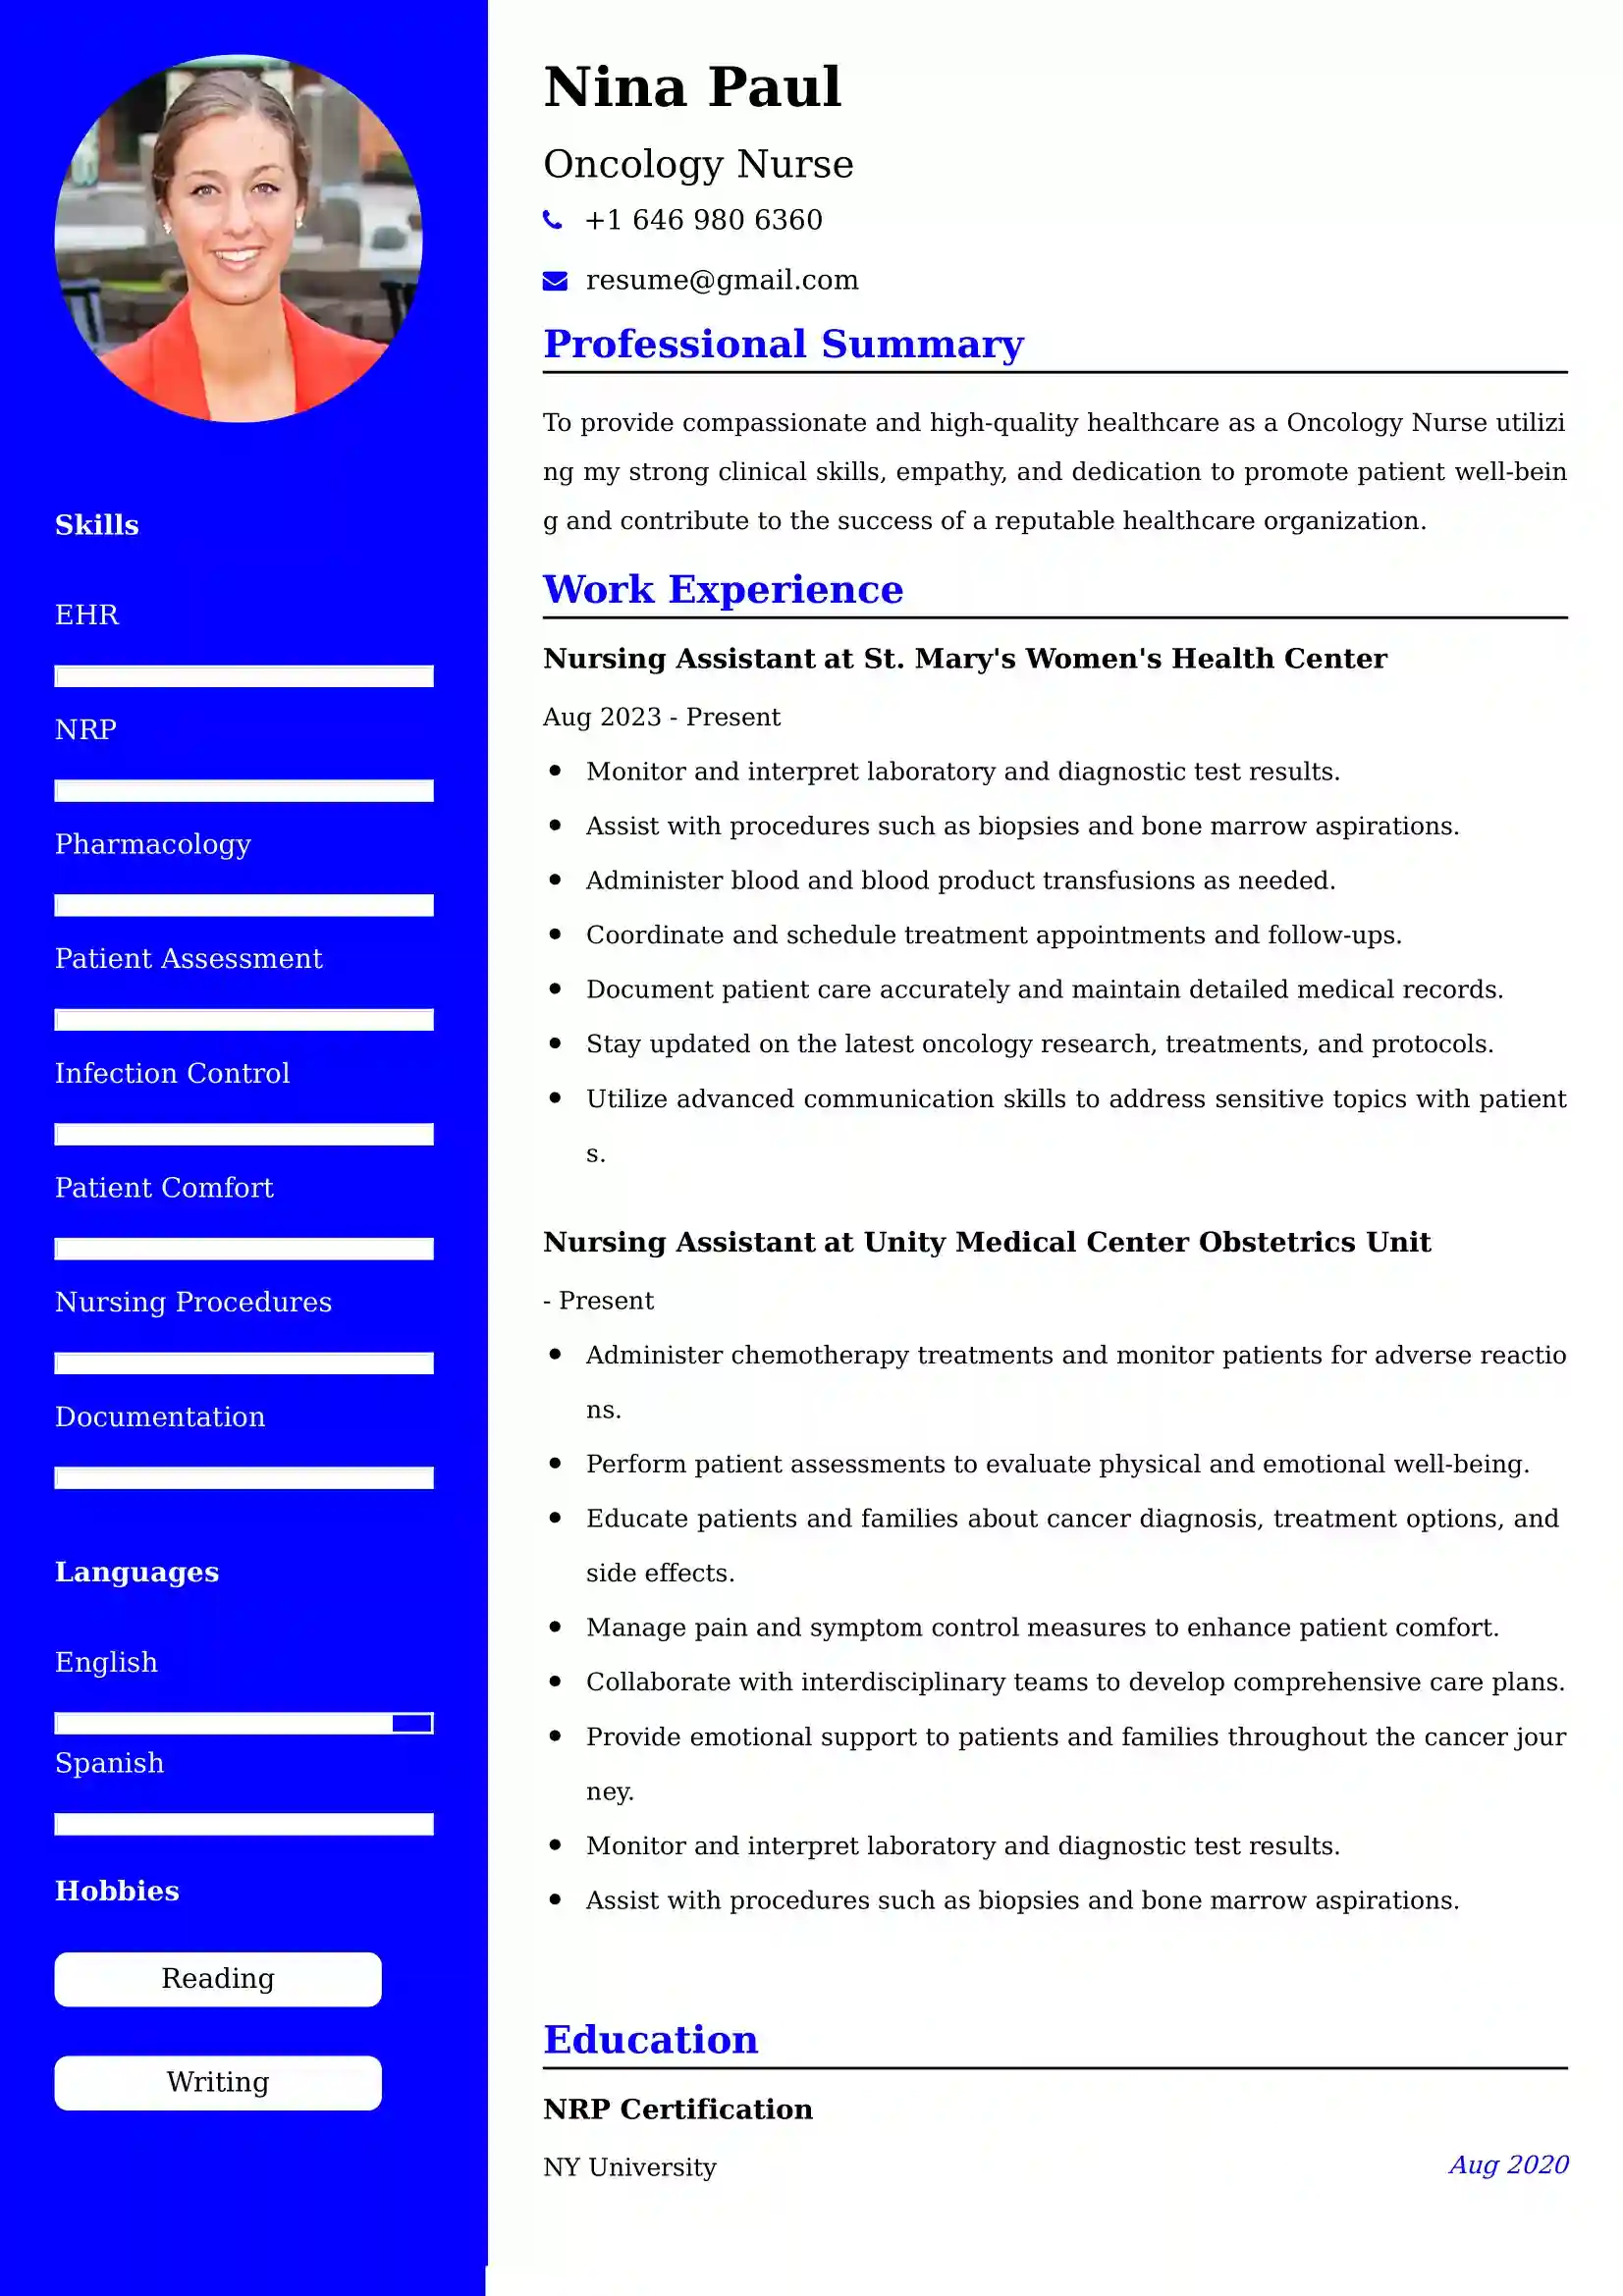 Oncology Nurse CV Examples - US Format